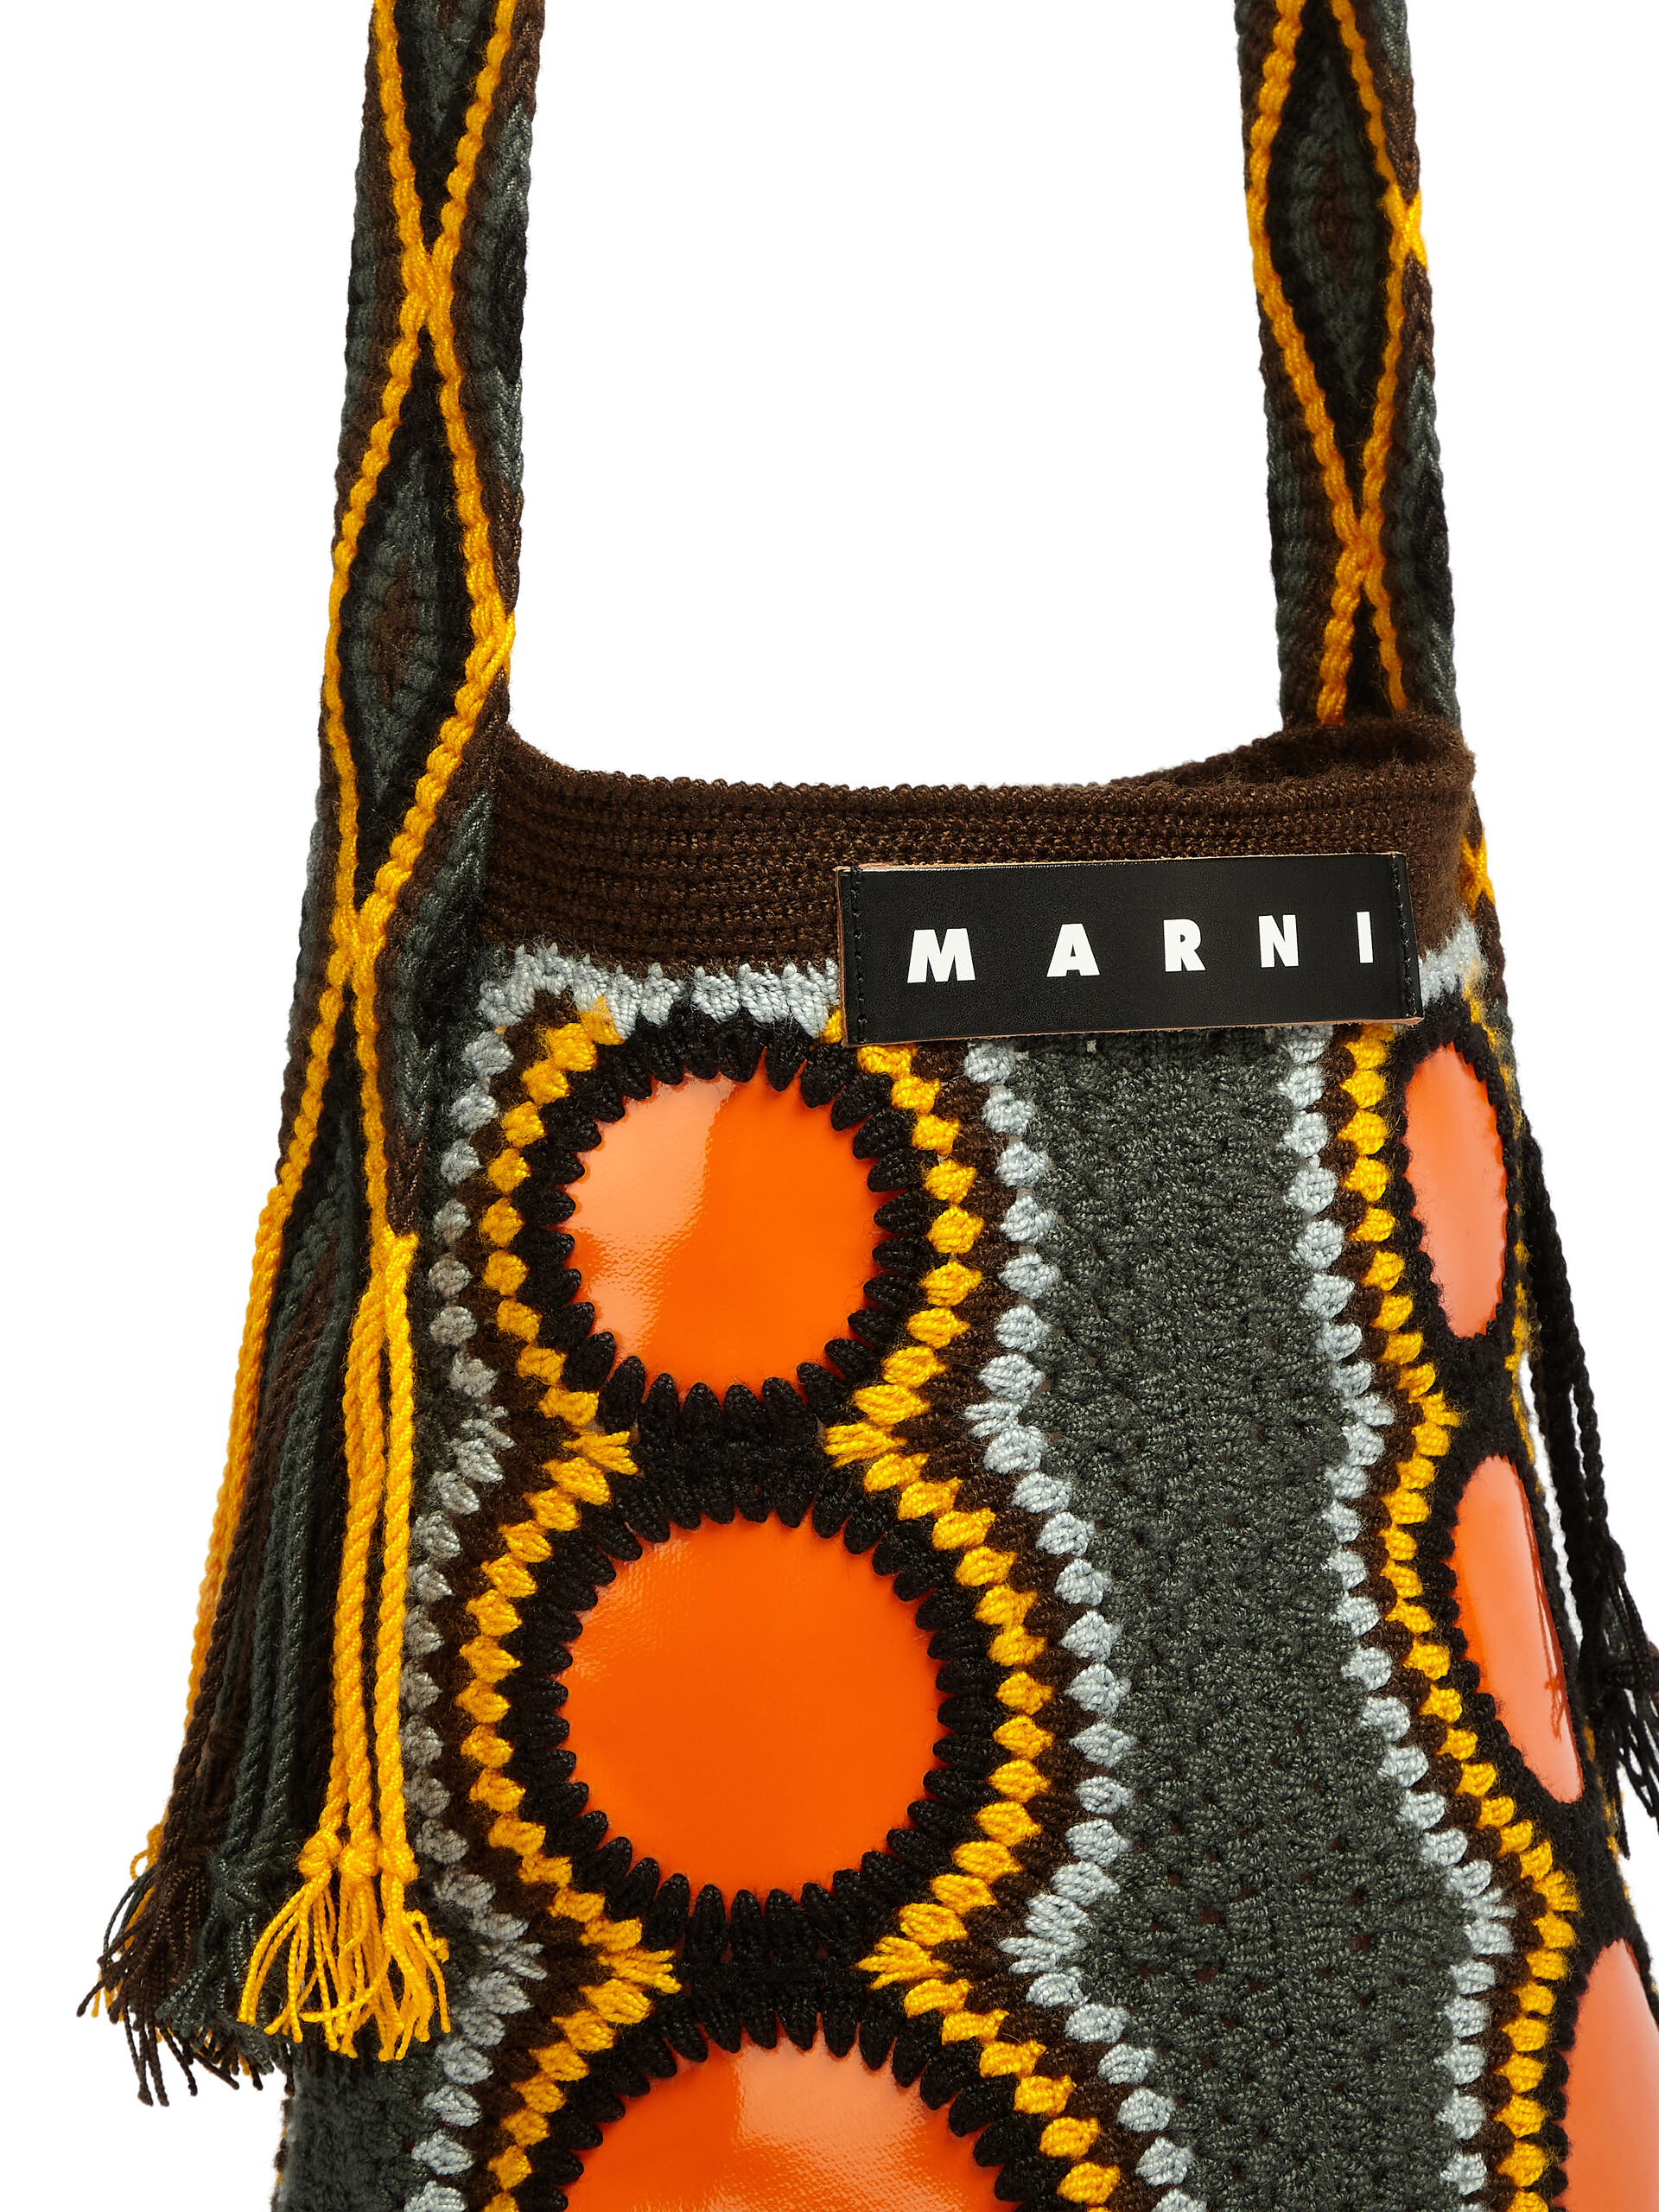 MARNI MARKET bag in green and orange technical wool - Bags - Image 4